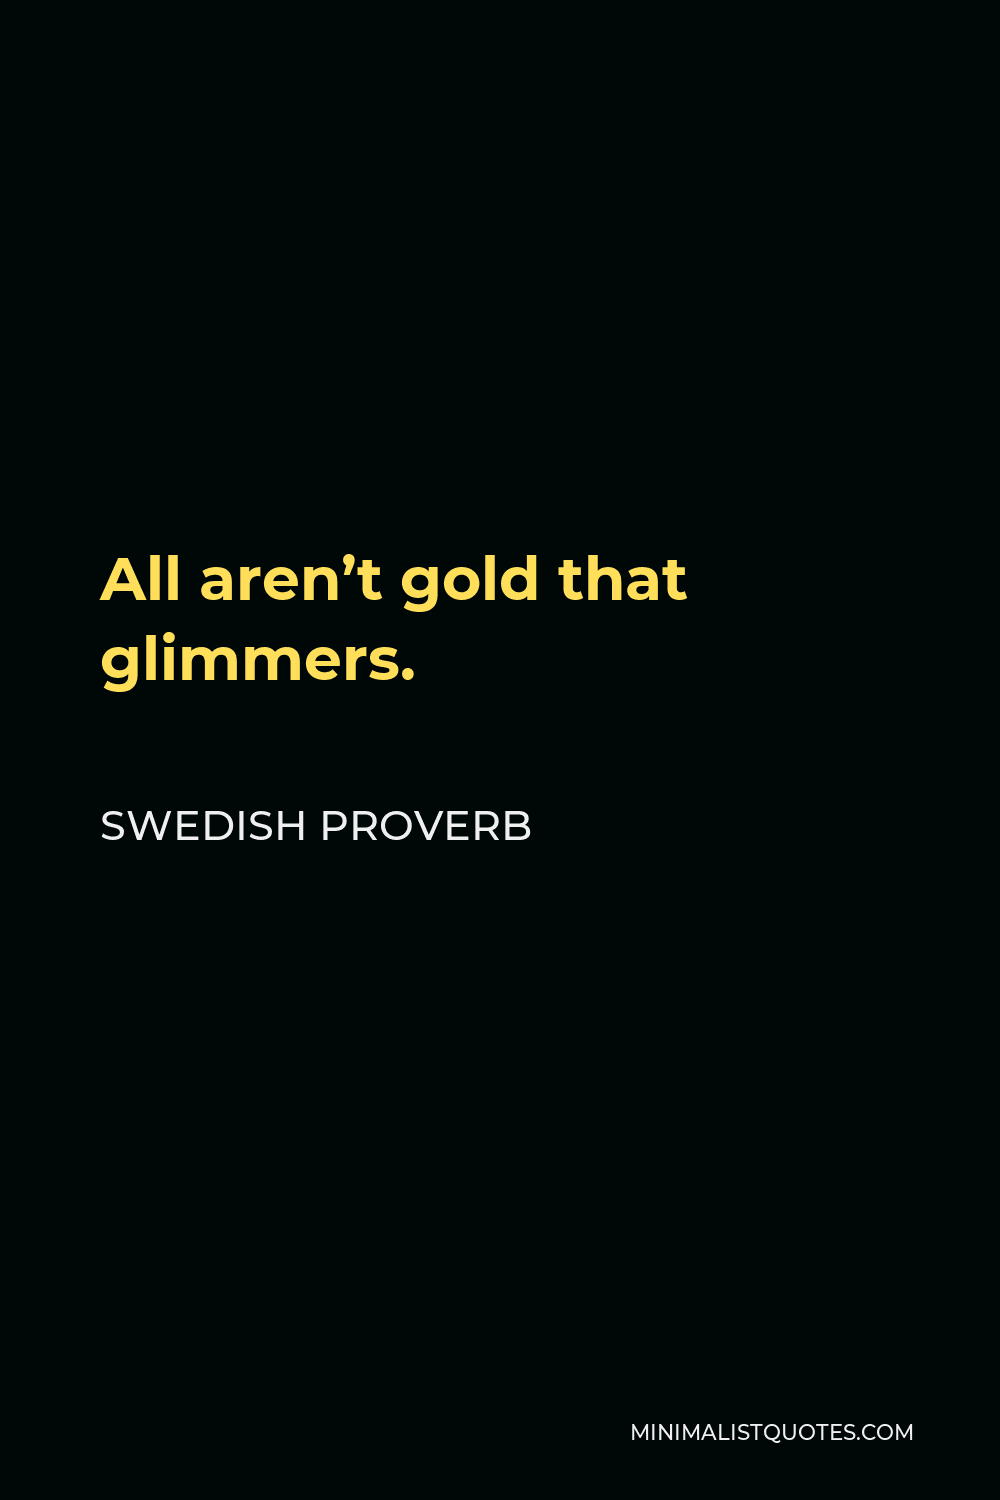 Swedish Proverb Quote - All aren’t gold that glimmers.